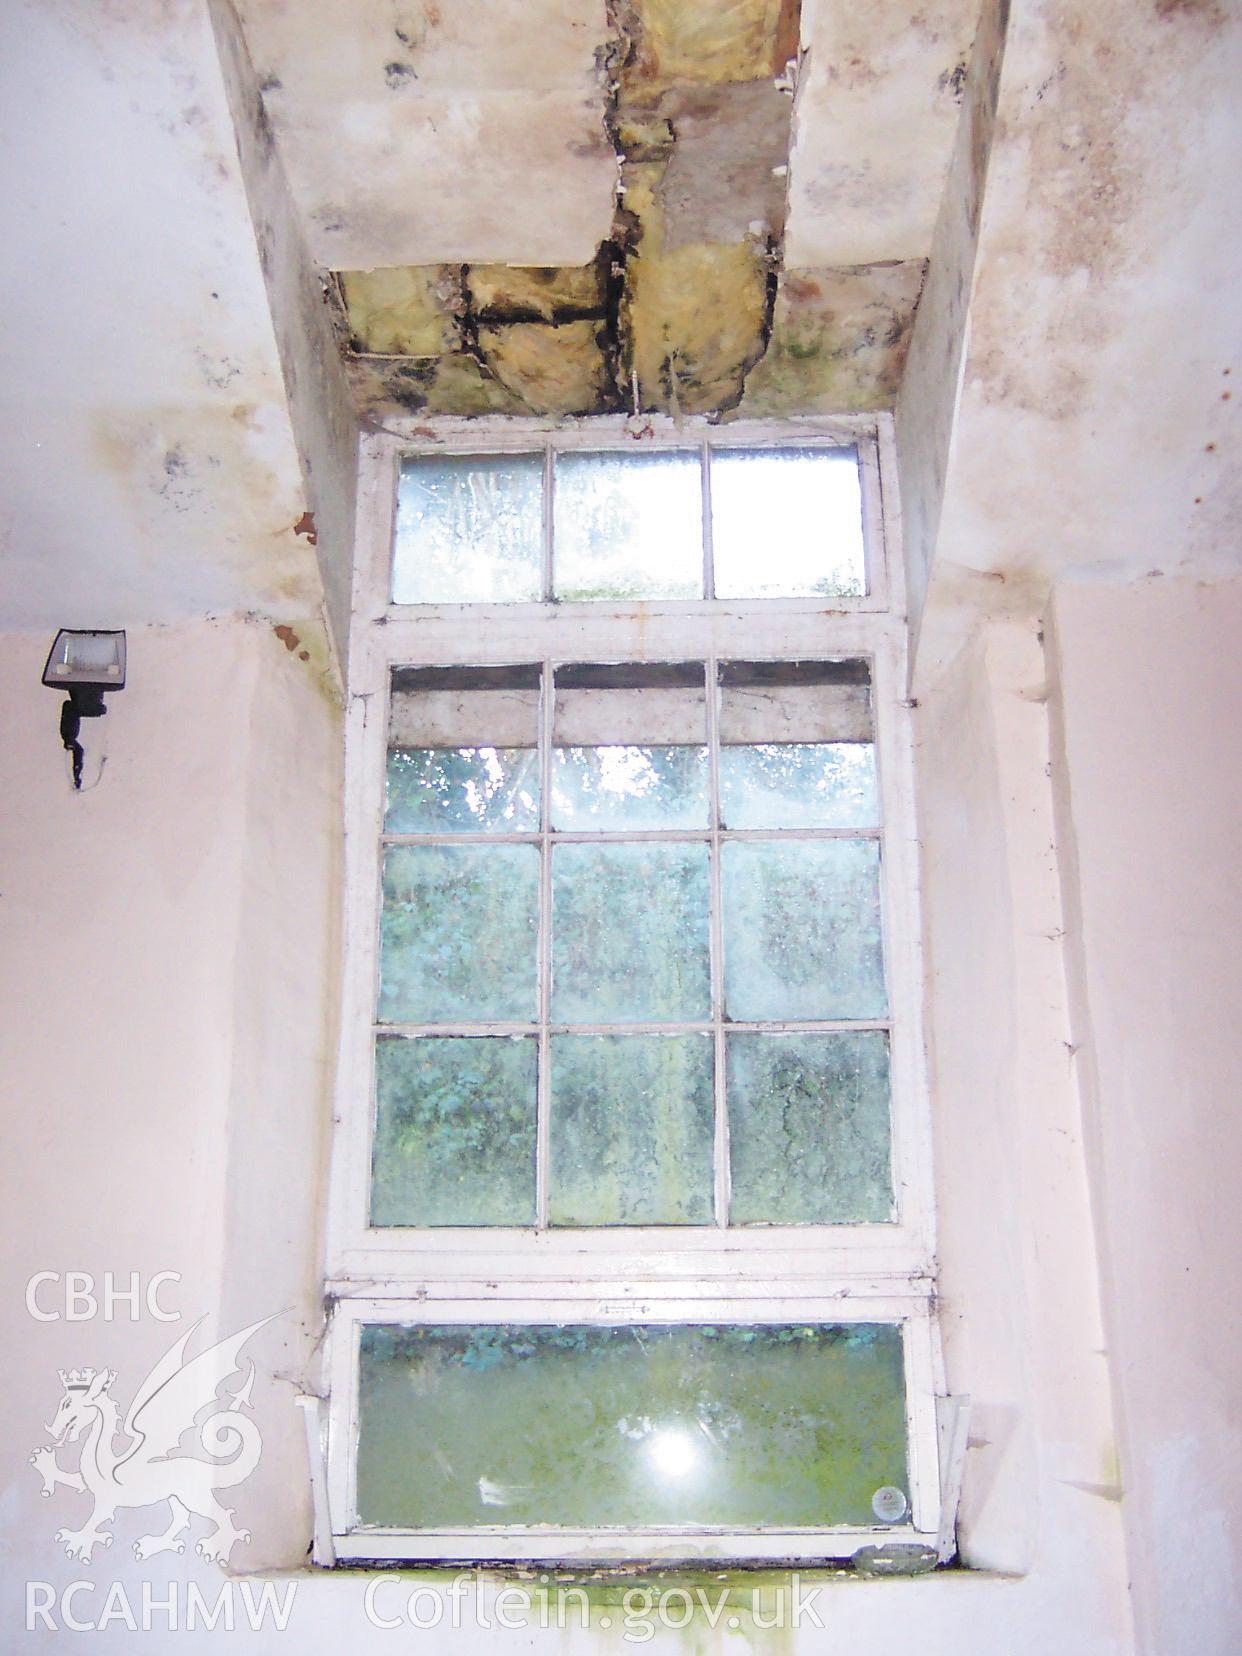 Colour digital photograph of the former school room window.